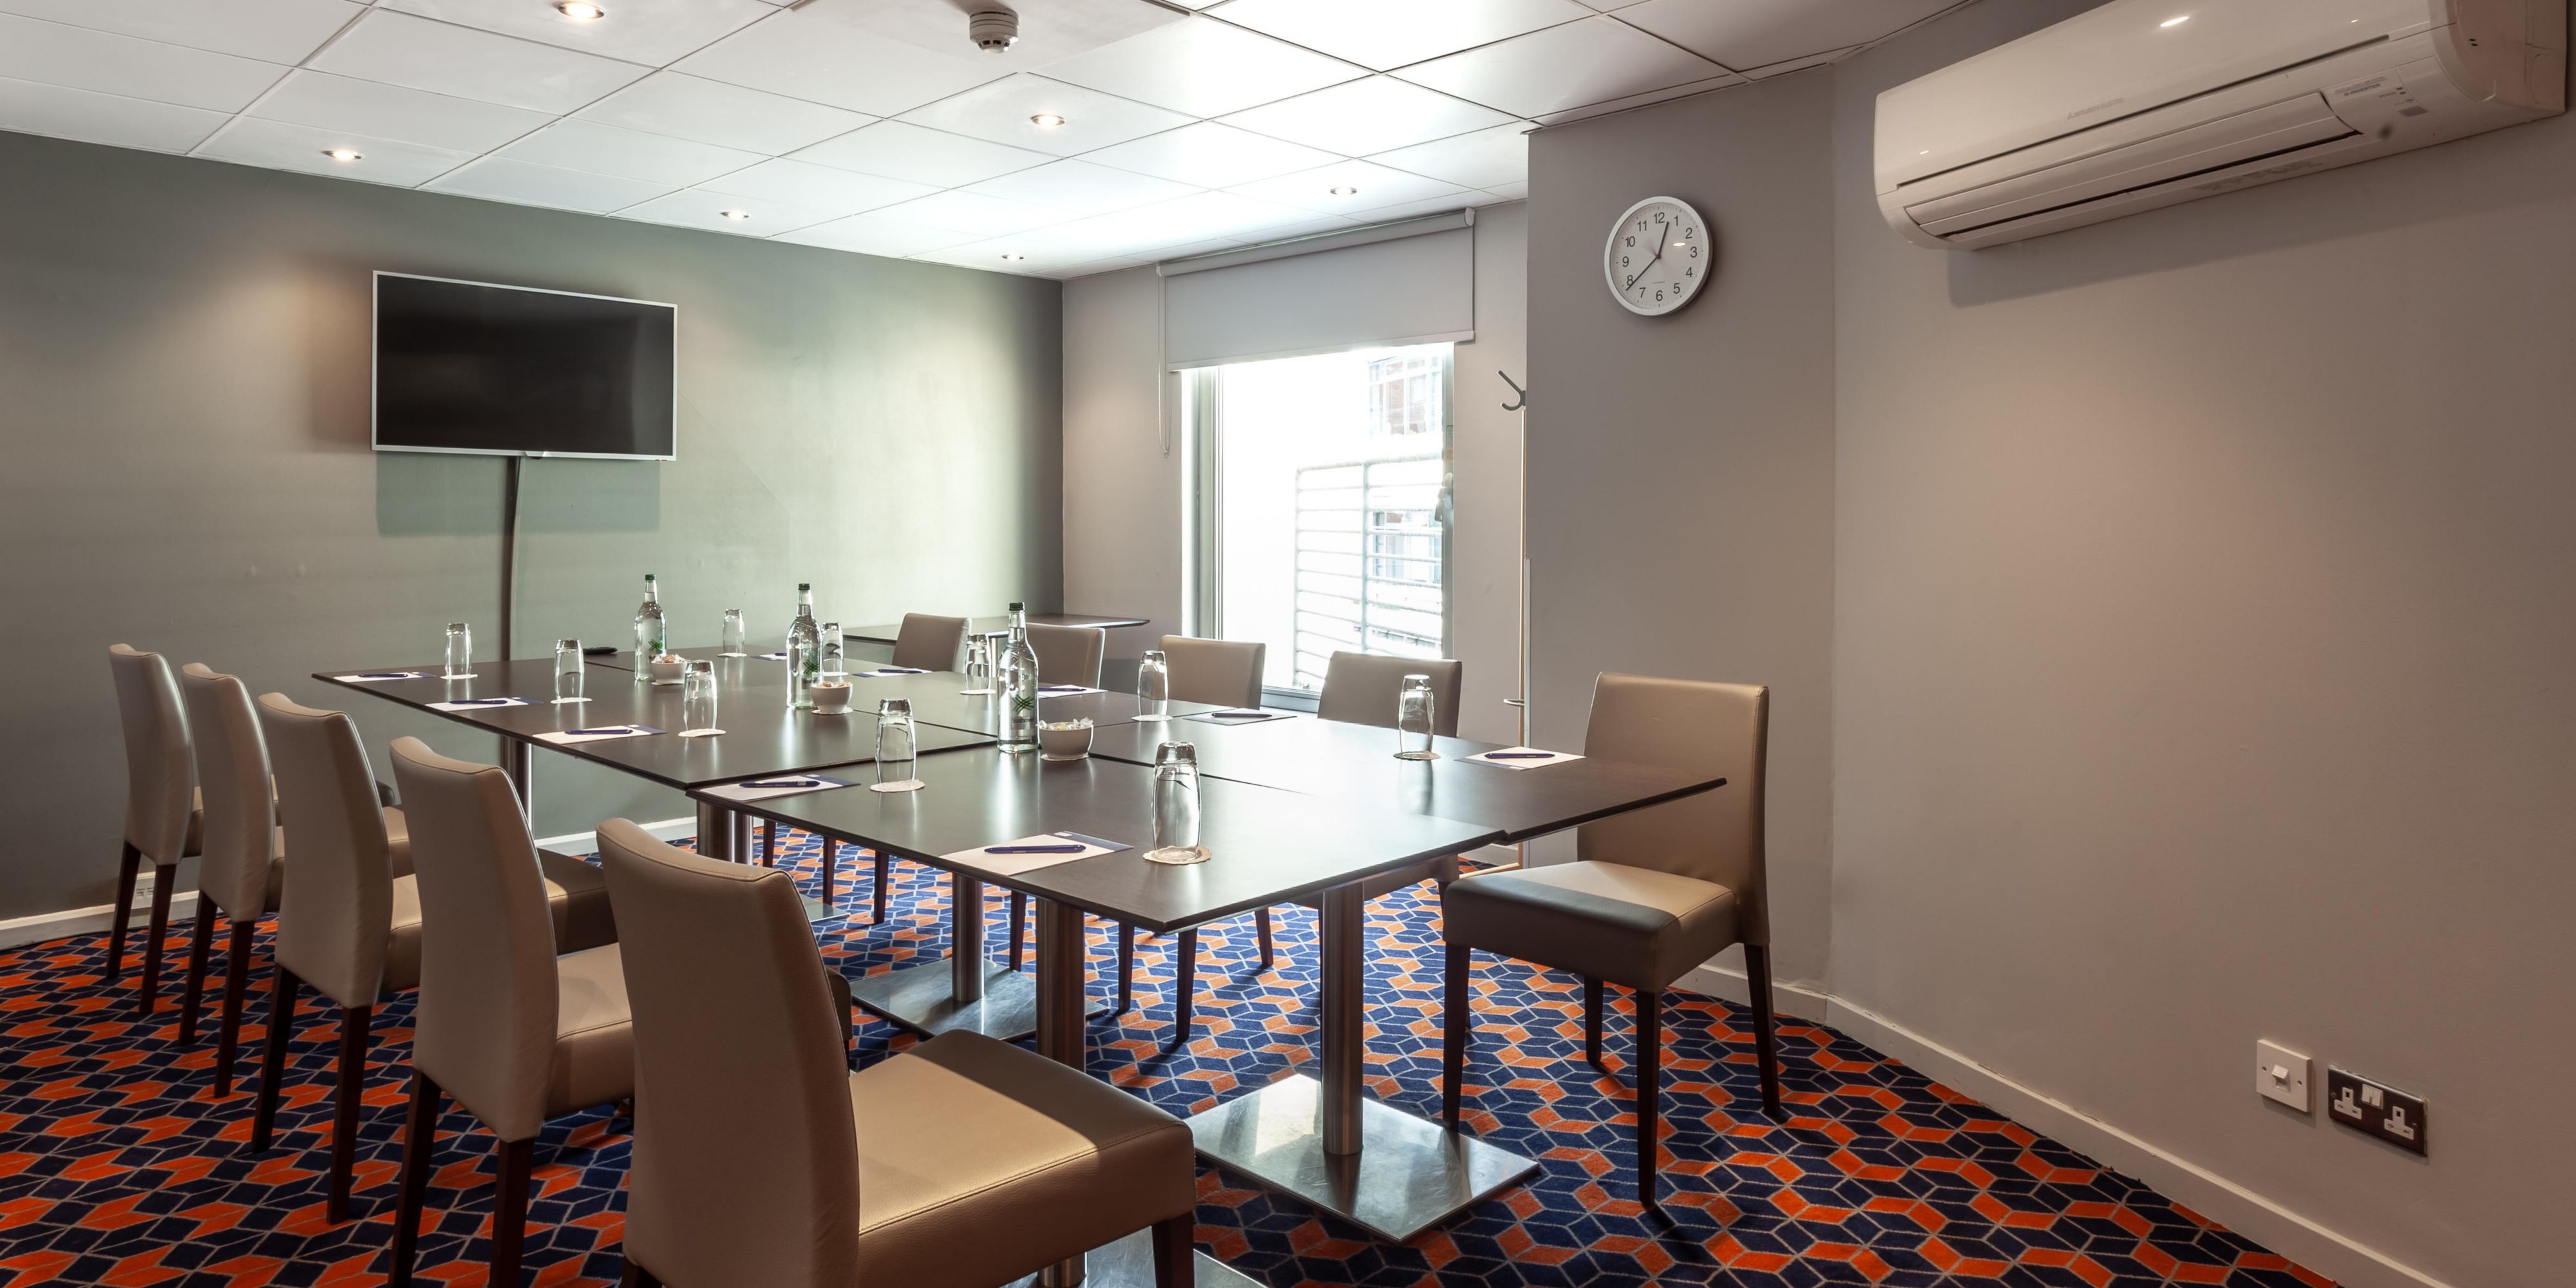 Our newly refurbished air-conditioned meeting room benefits from natural daylight, LCD projector, TV, flip chart and pens. 
Tea & coffee is available throughout the day and lunch can either be a buffet in the hotel or sit down meal in La Bonne Auberge. 
Suitable for boardroom style meetings for up to 16 people or theatre style for up to 20 people.
